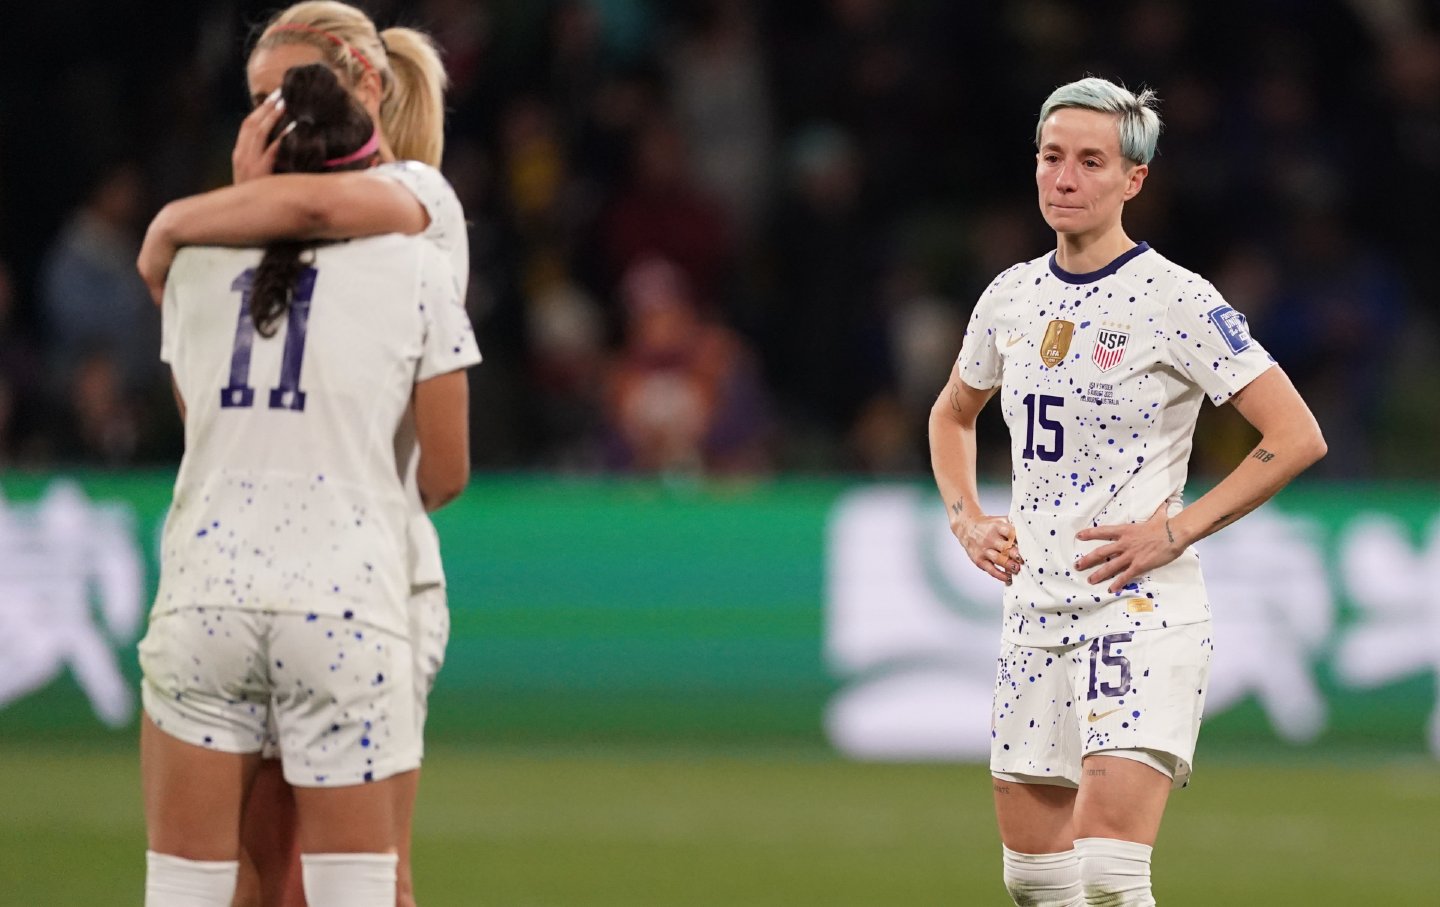 Megan Rapinoe, right, reacts to the United States' loss to Sweden in the Women's World Cup soccer match in Melbourne, Australia, on August 6, 2023.